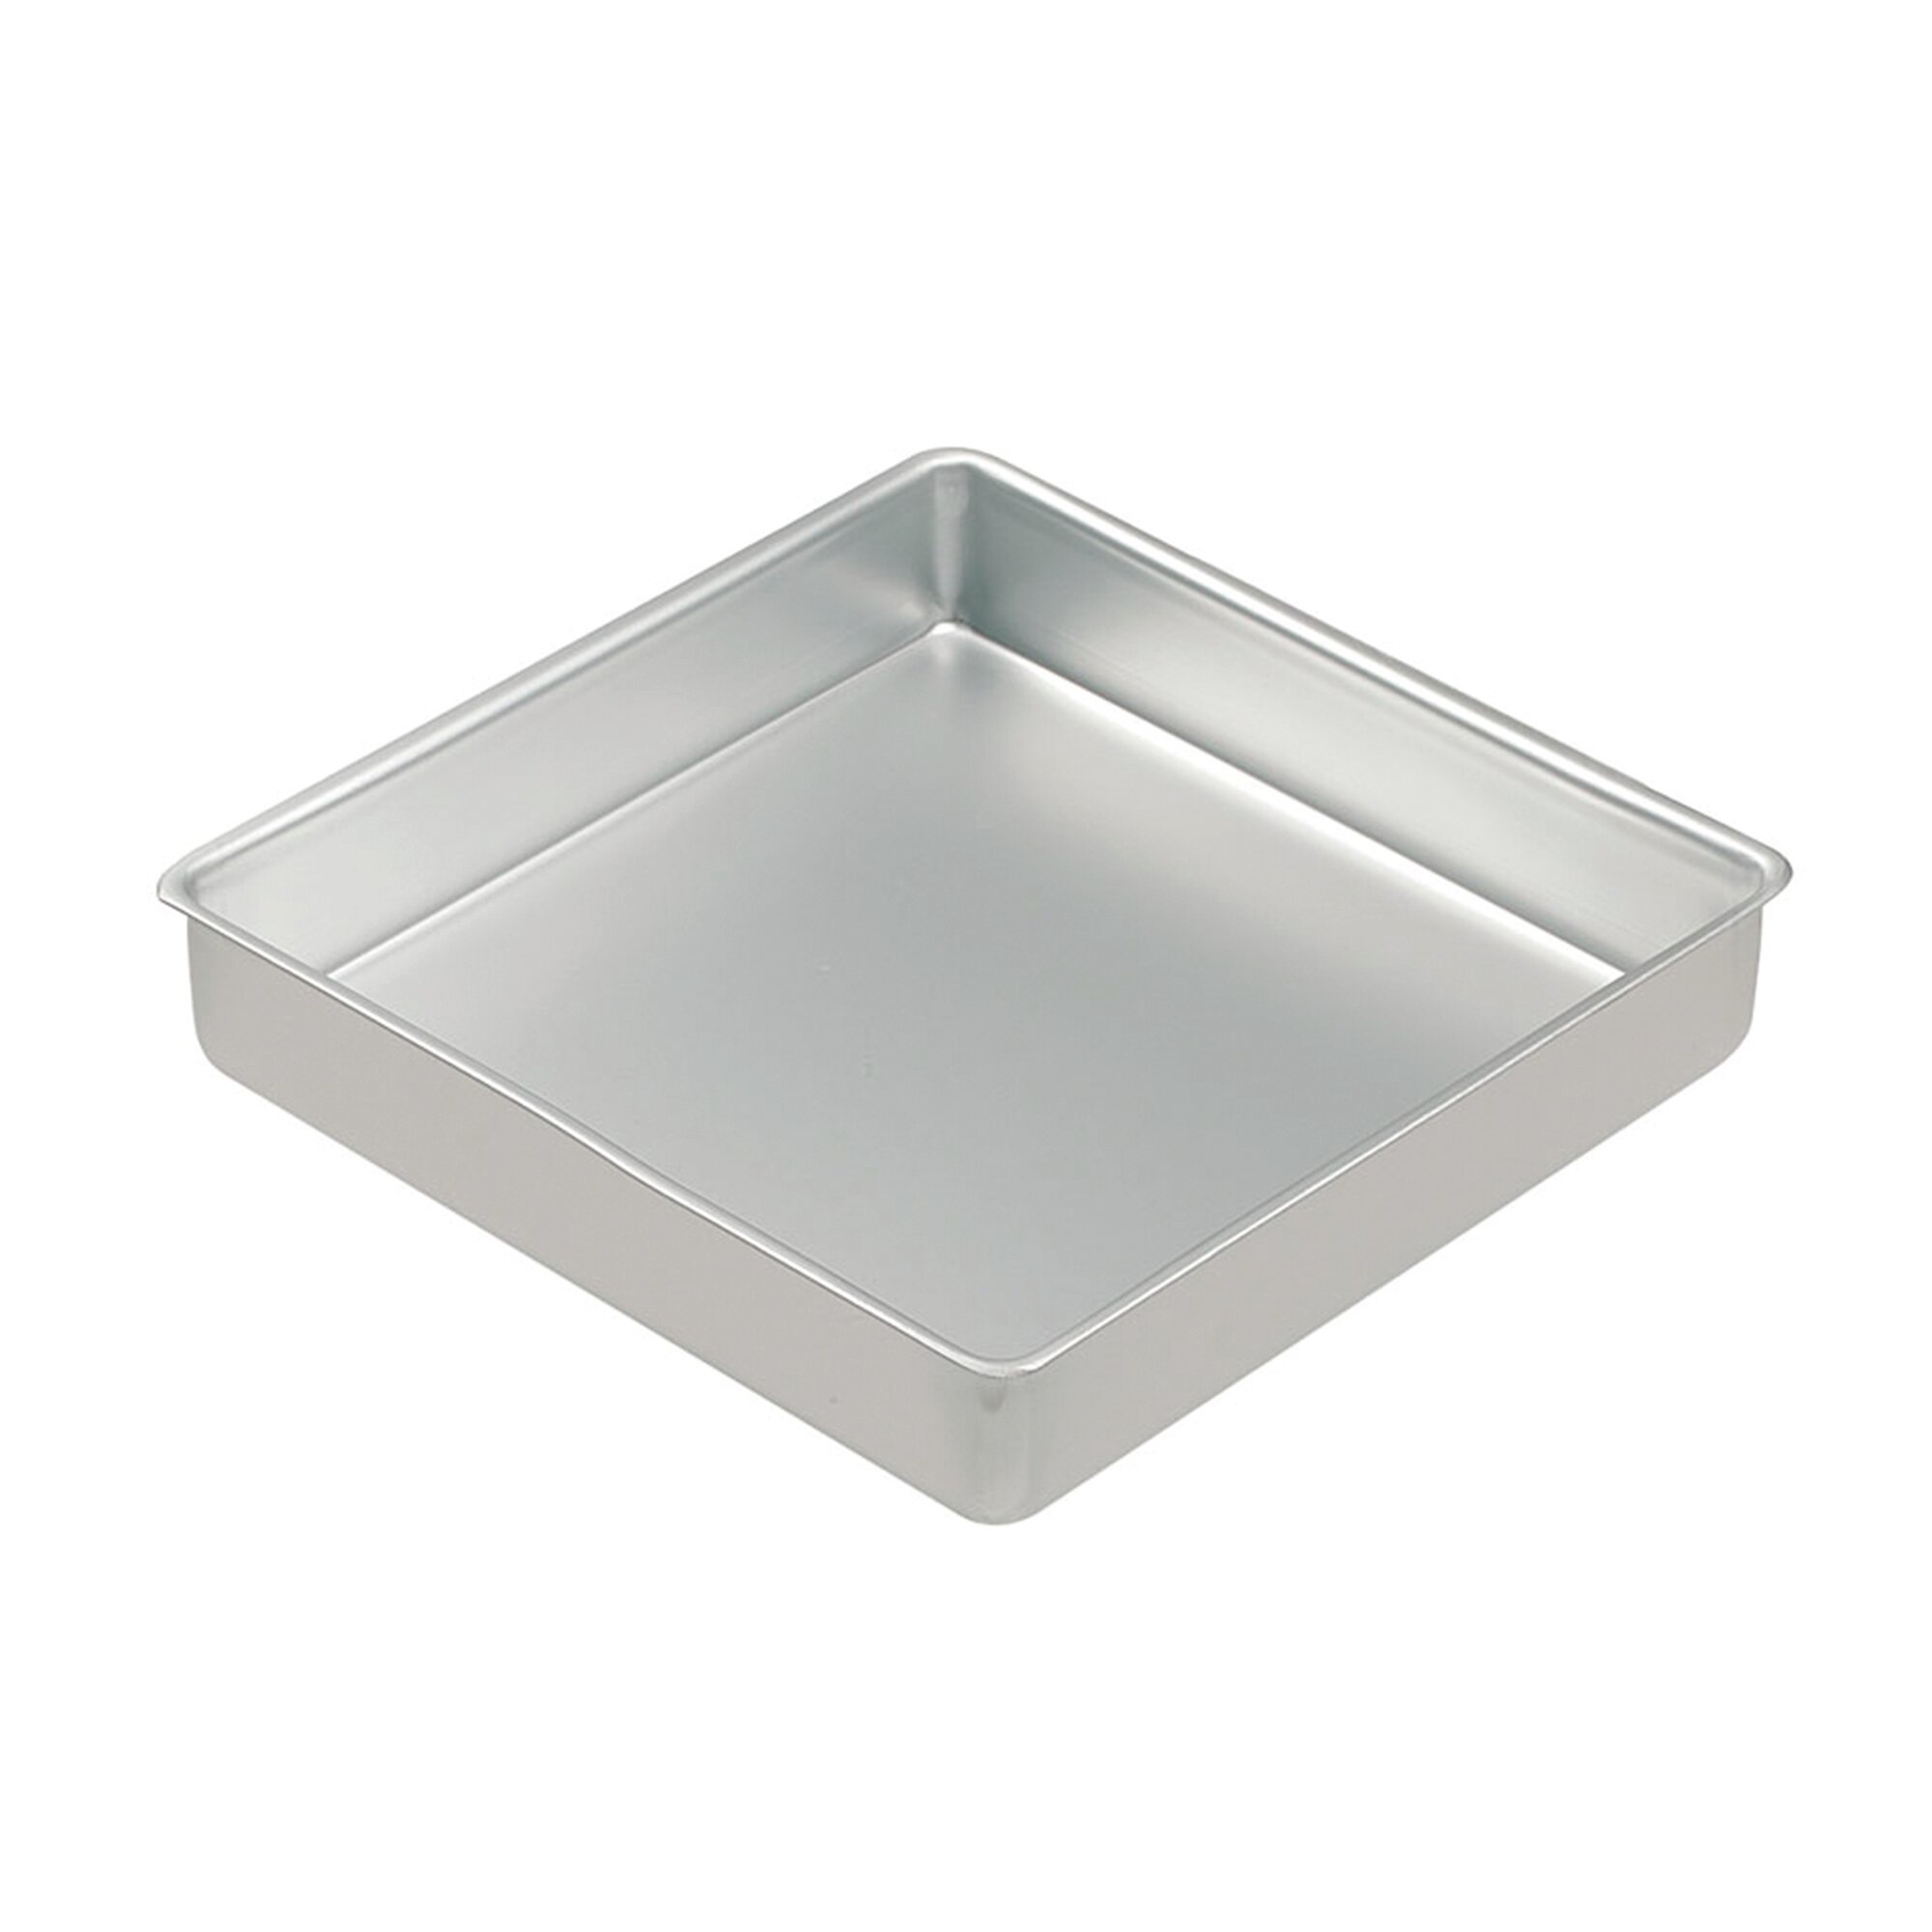 Buy Best Baking Utensils Aluminium Square Cake Pan/Square Cake Tin/Square  Tray/Brownie Tray/Sponge Cake Tray - 6,8,10,12 inches x 2.5 inch Height for  1/2kg,1kg,2kg & 3kg Cake Online at Low Prices in India -